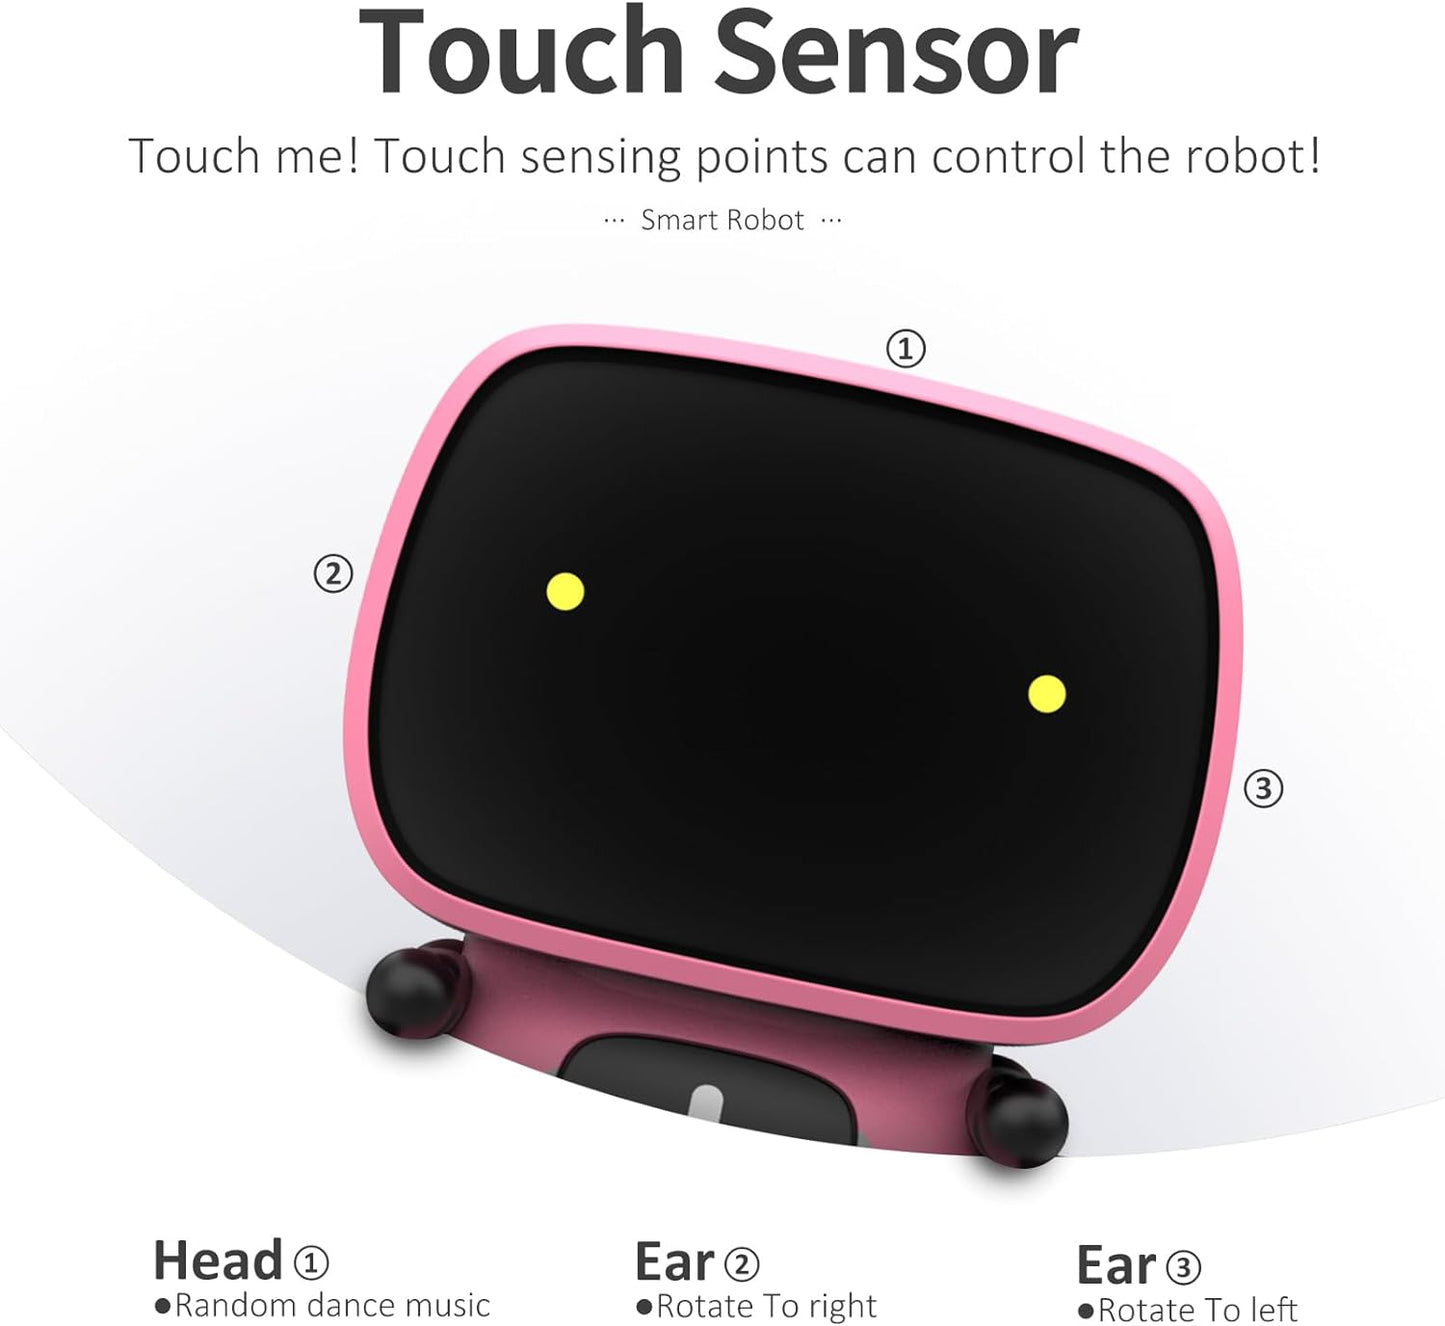 Interactive Smart Robot Toys, Intelligent Robot Toys for Kids, Children Girls Robotic Toys 3 Years Old Up, Voice Control & Touch Sense, Dance & Sing & Walk, Recorder & Speak like You